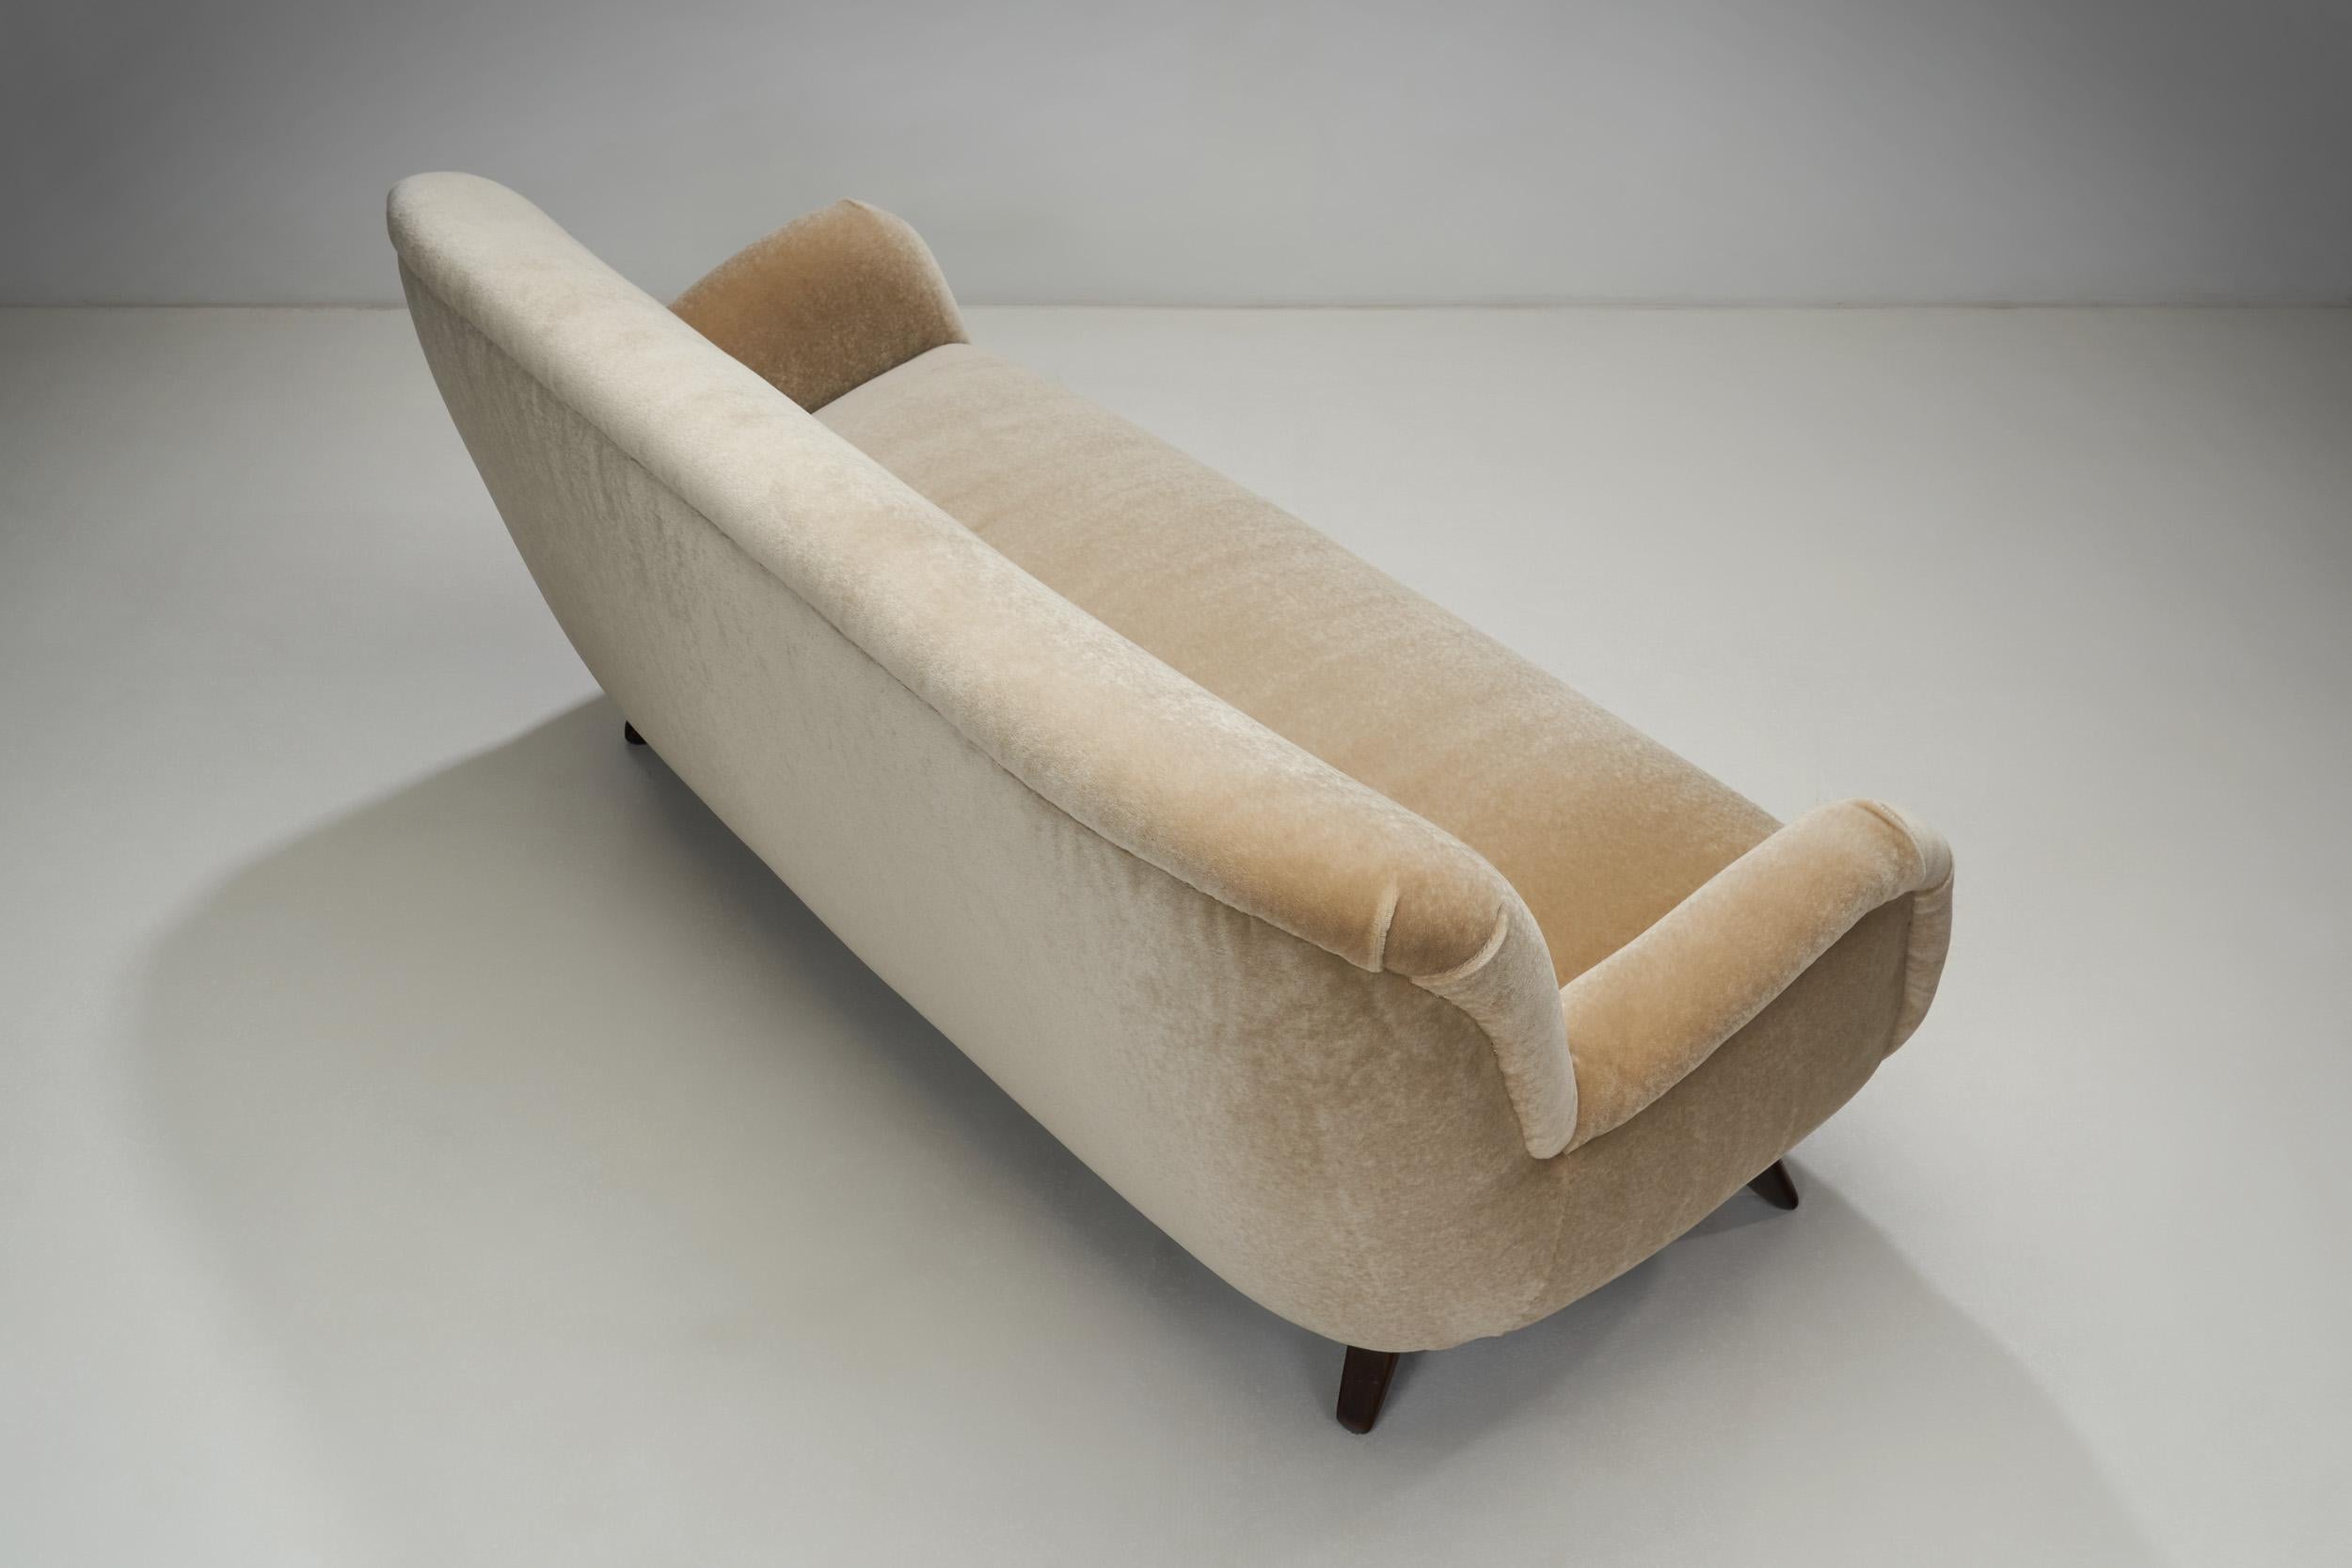 Mid-20th Century Swedish Modern Sofa with Cherry Wood Legs, Sweden 1950s For Sale